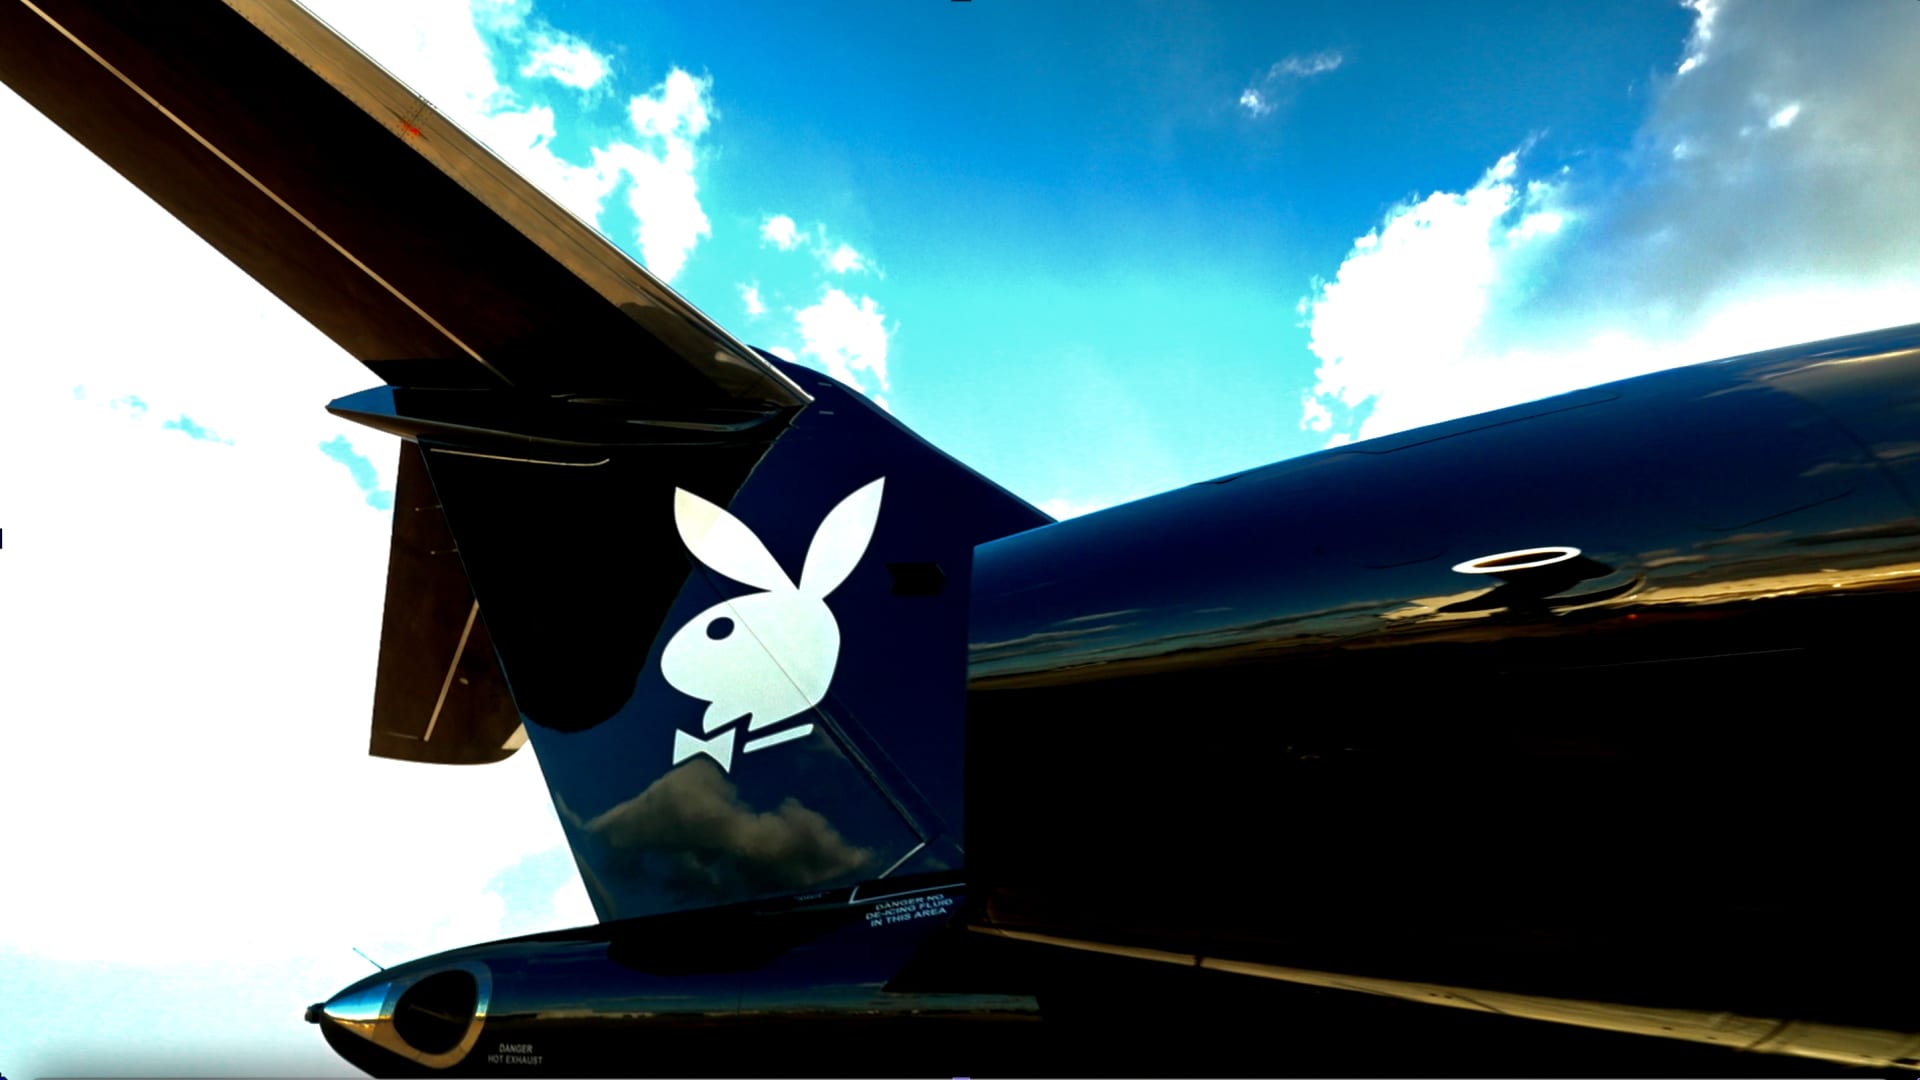 The new Playboy jet's tail wing emblazoned with the famous bunny logo.